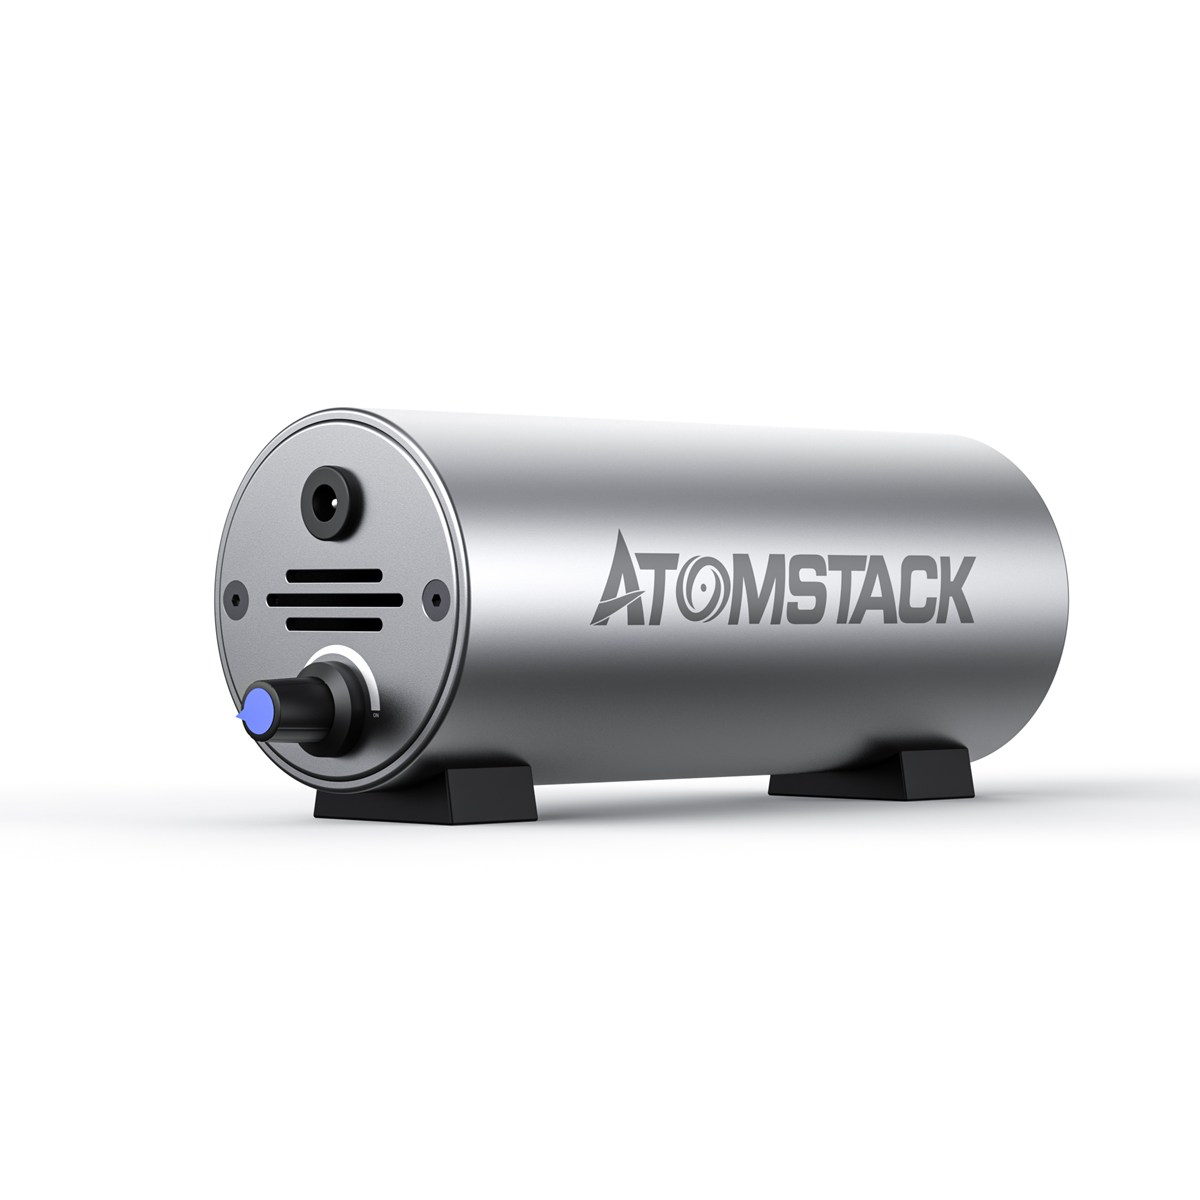 Find Atomstack Air Assist System for Laser Engraving Machine Laser Cutting Engraving Air assisted Accessories Super Airflow for Sale on Gipsybee.com with cryptocurrencies